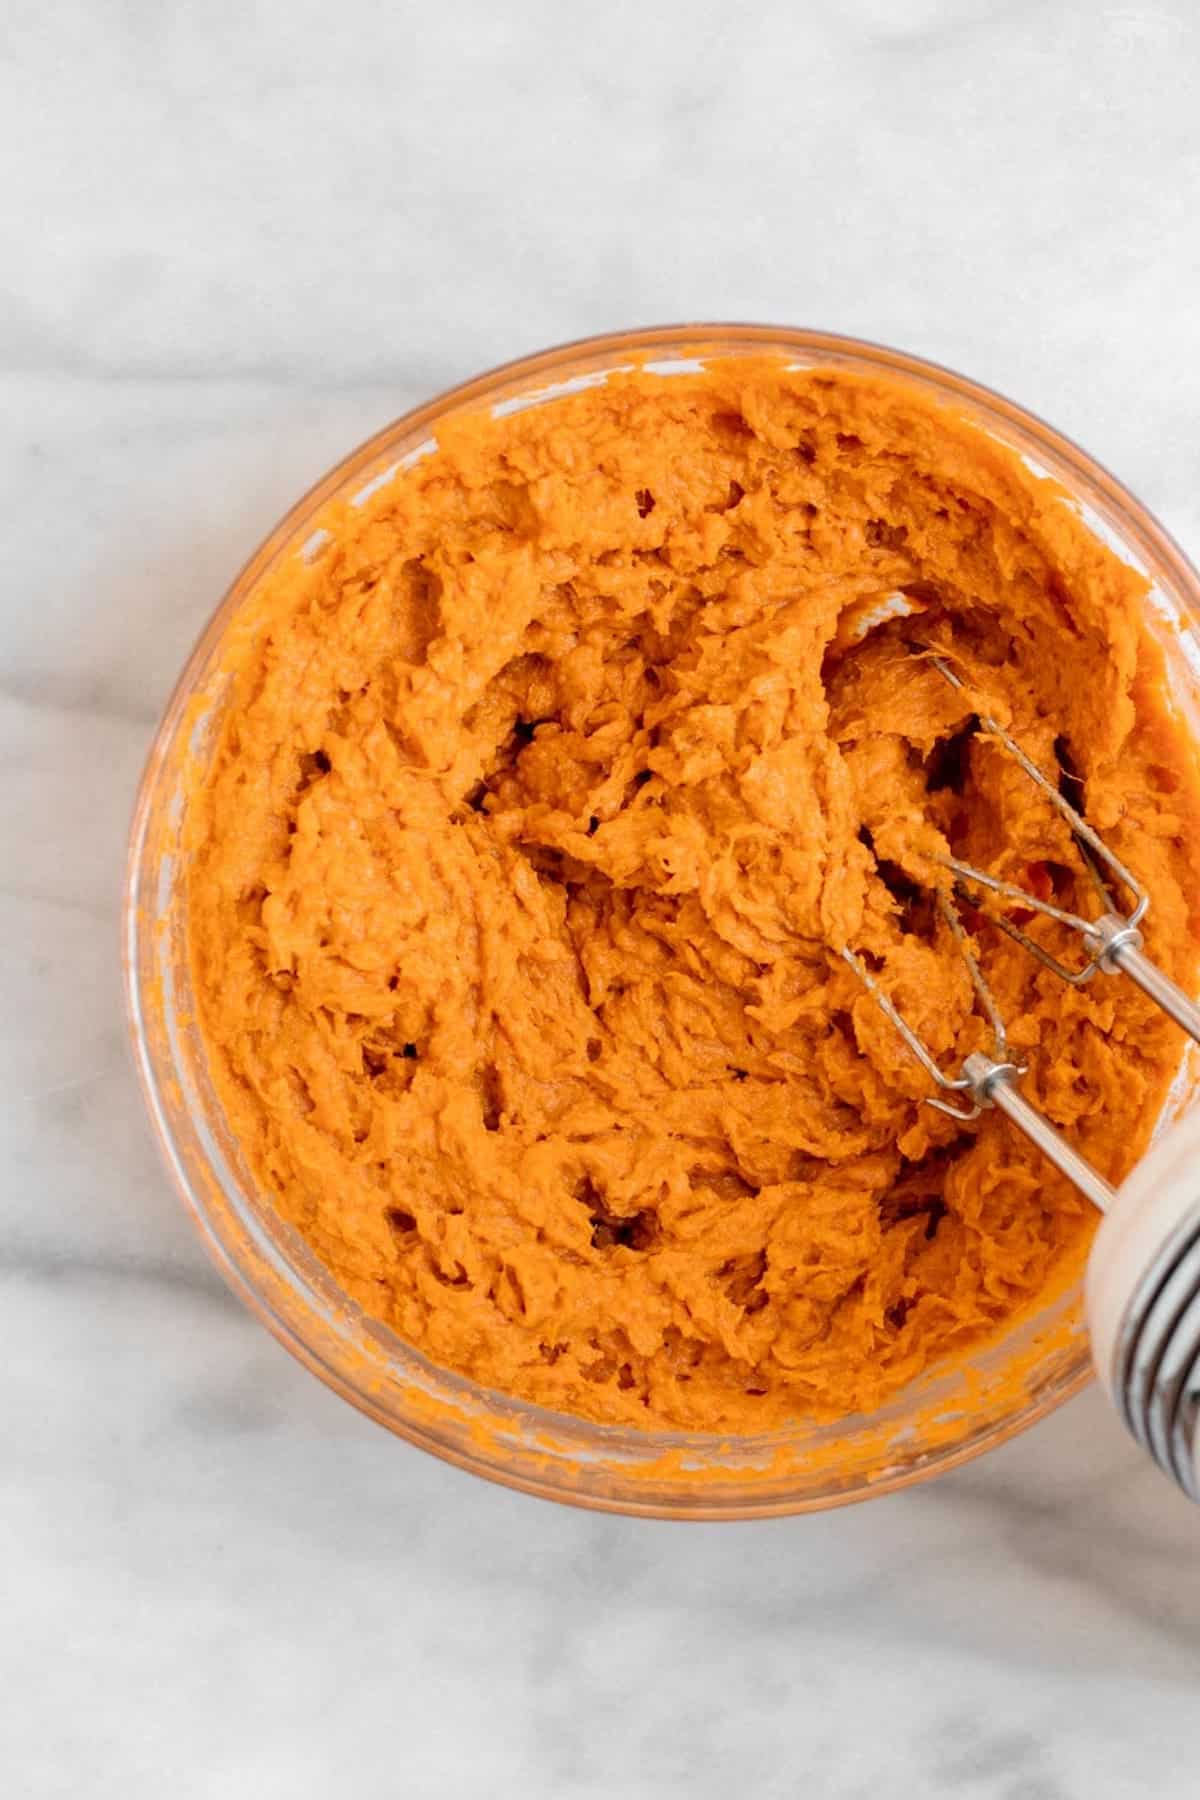 Sweet potato whipped in a glass bowl.